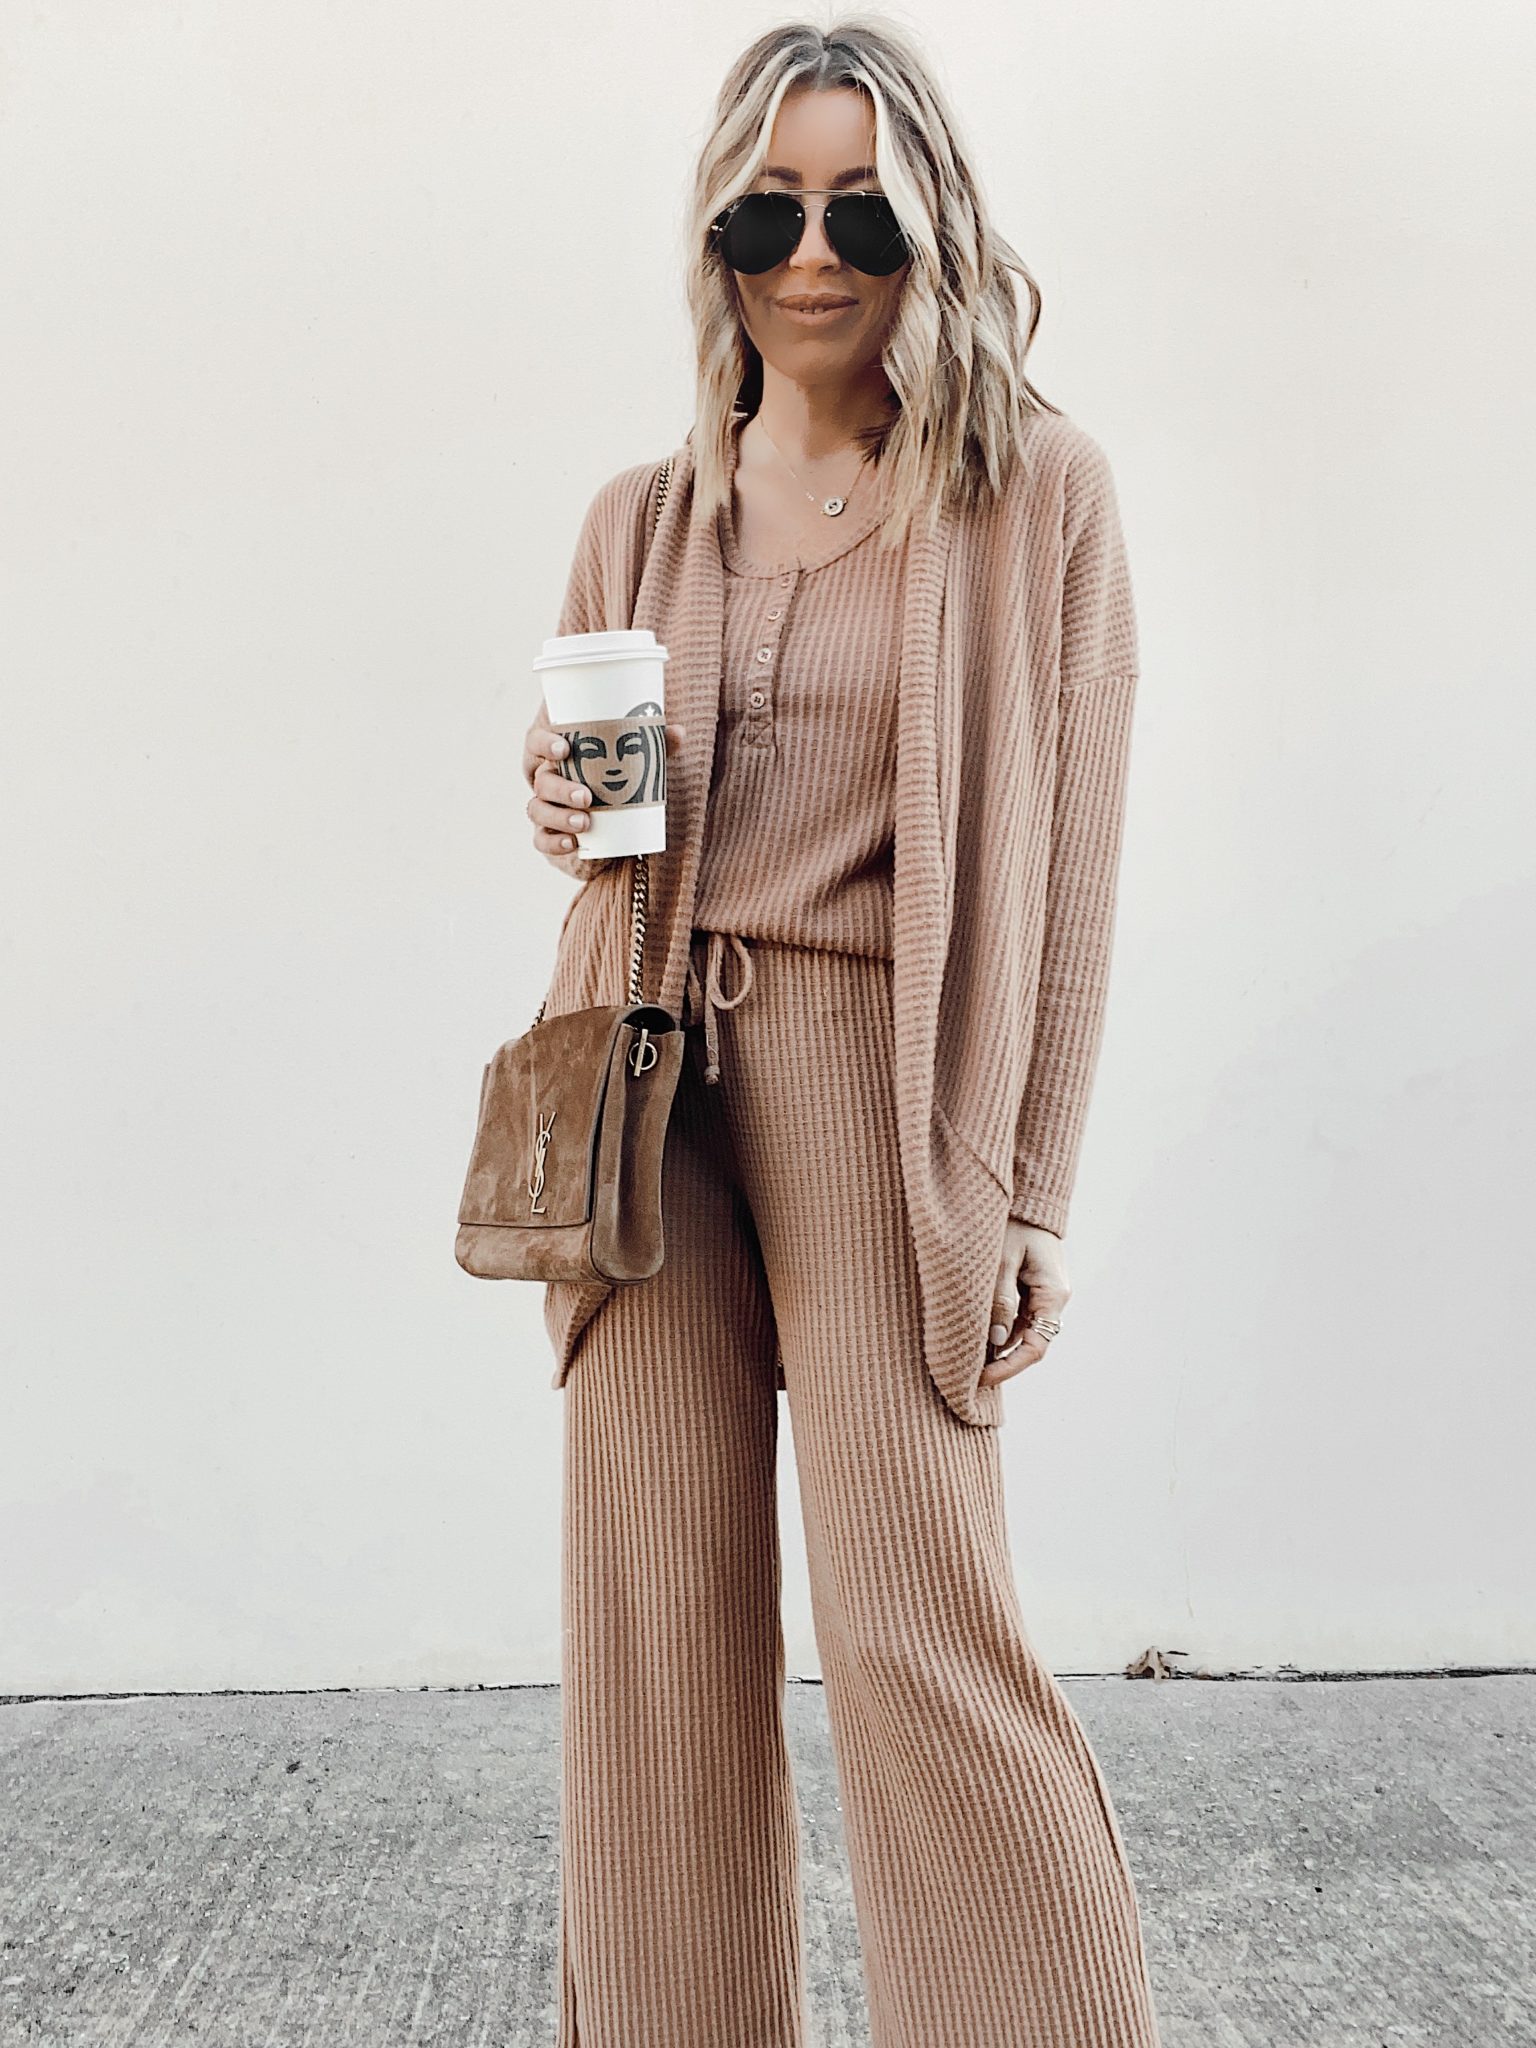 20 Best Sweater Outfits for Skinny Girls to Wear this Year